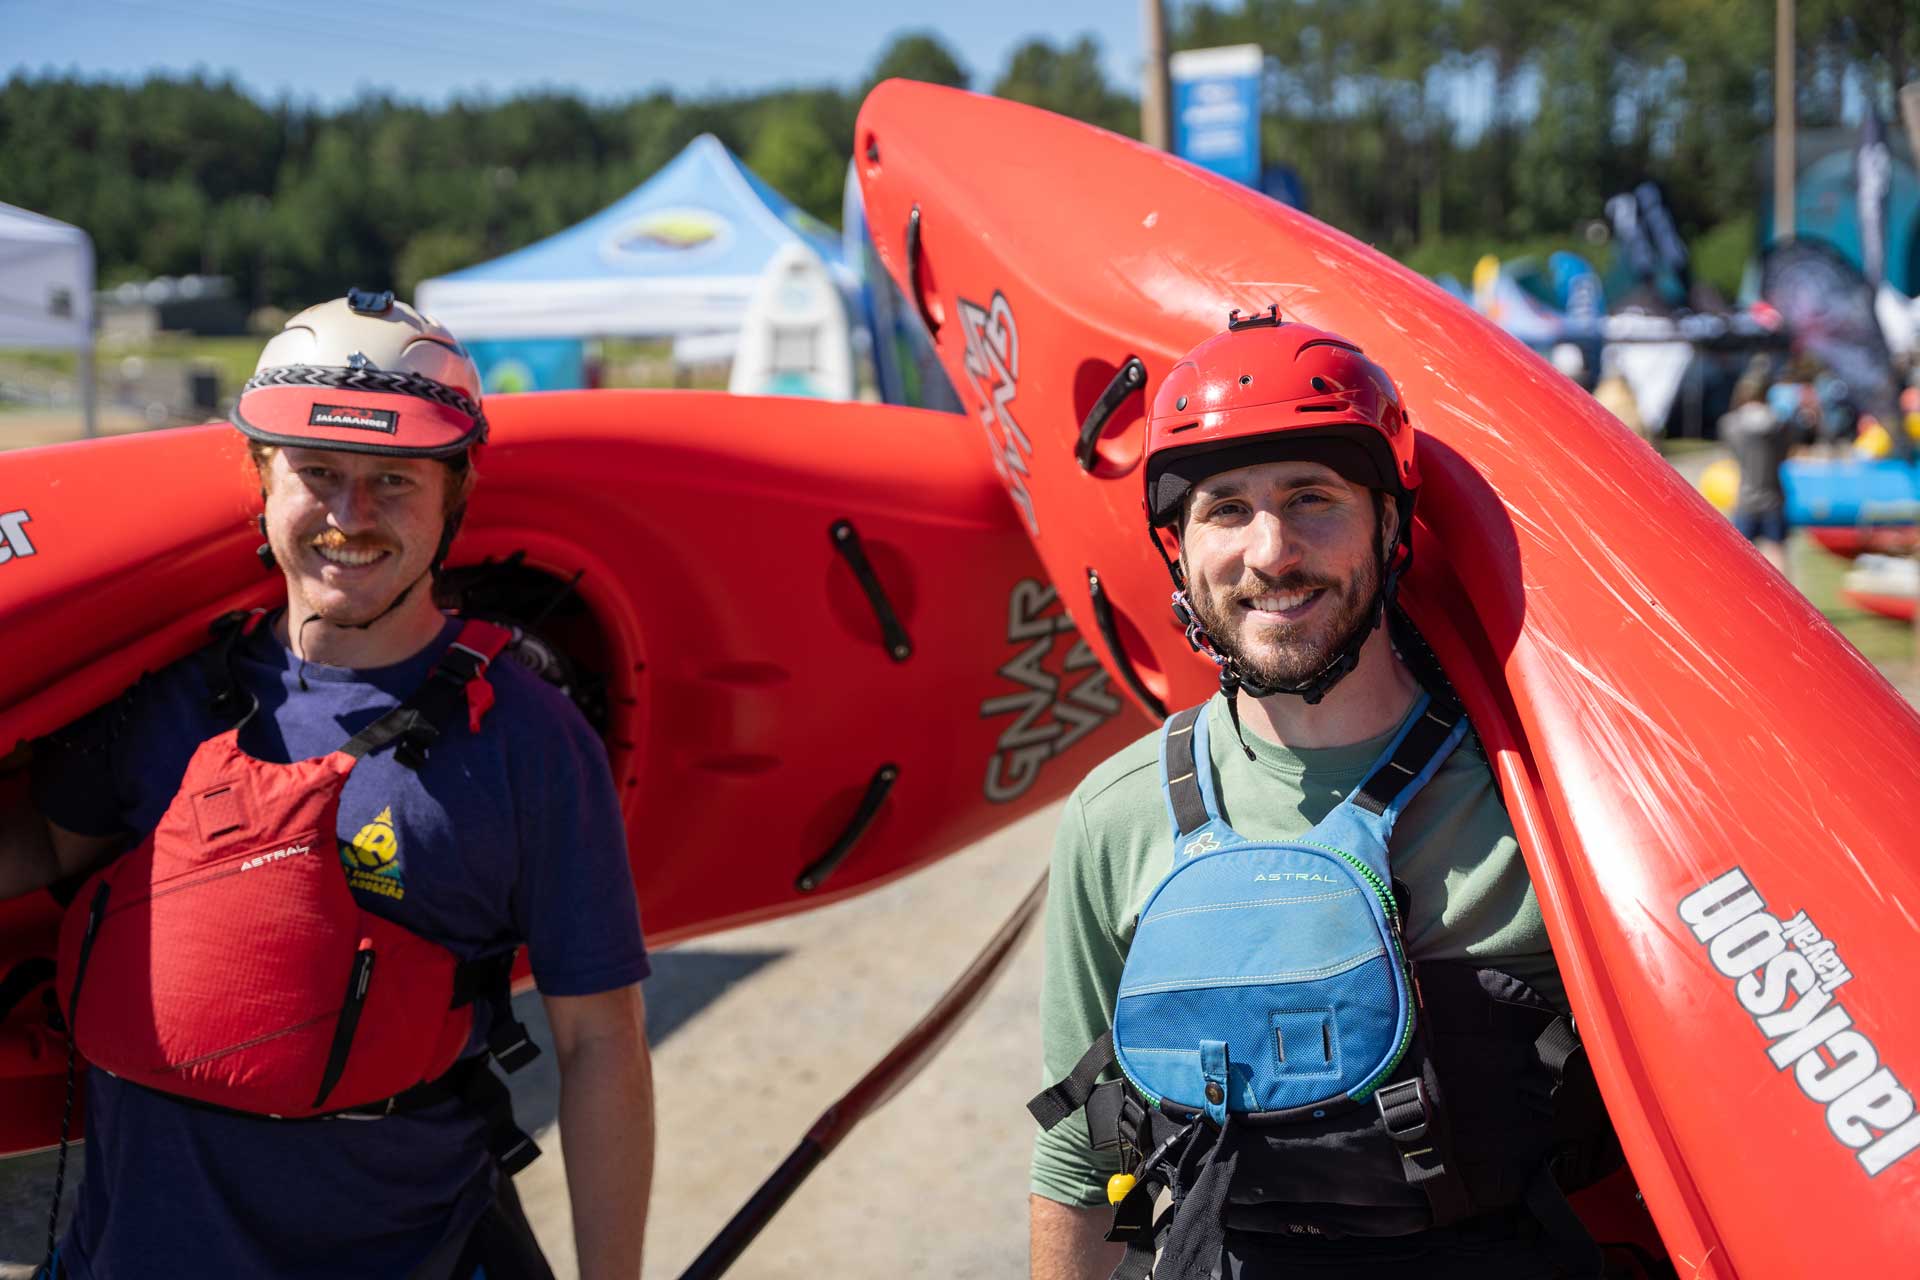 Two smiling paddlers